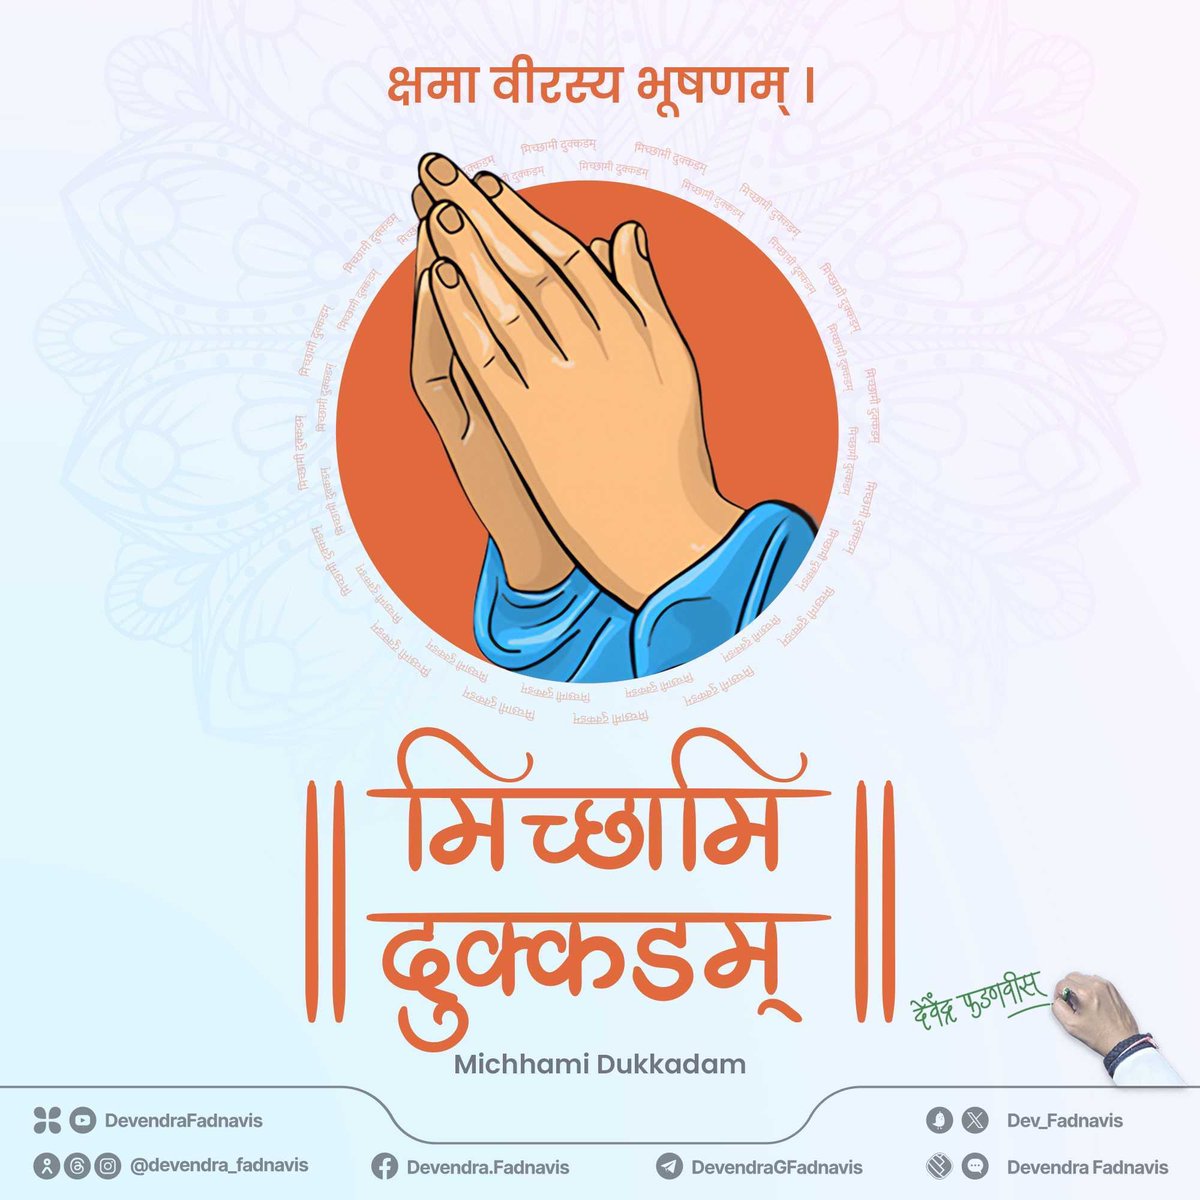 The greatest gift a person can give is forgiveness. On this auspicious occasion of Paryushan Parva & Samvatsari, we fold our hands for forgiveness if, knowing or unknowingly, with our deeds, words, or behaviour, we have hurt you. #MichhamiDukkadam to one & all! पर्युषण पर्व और…